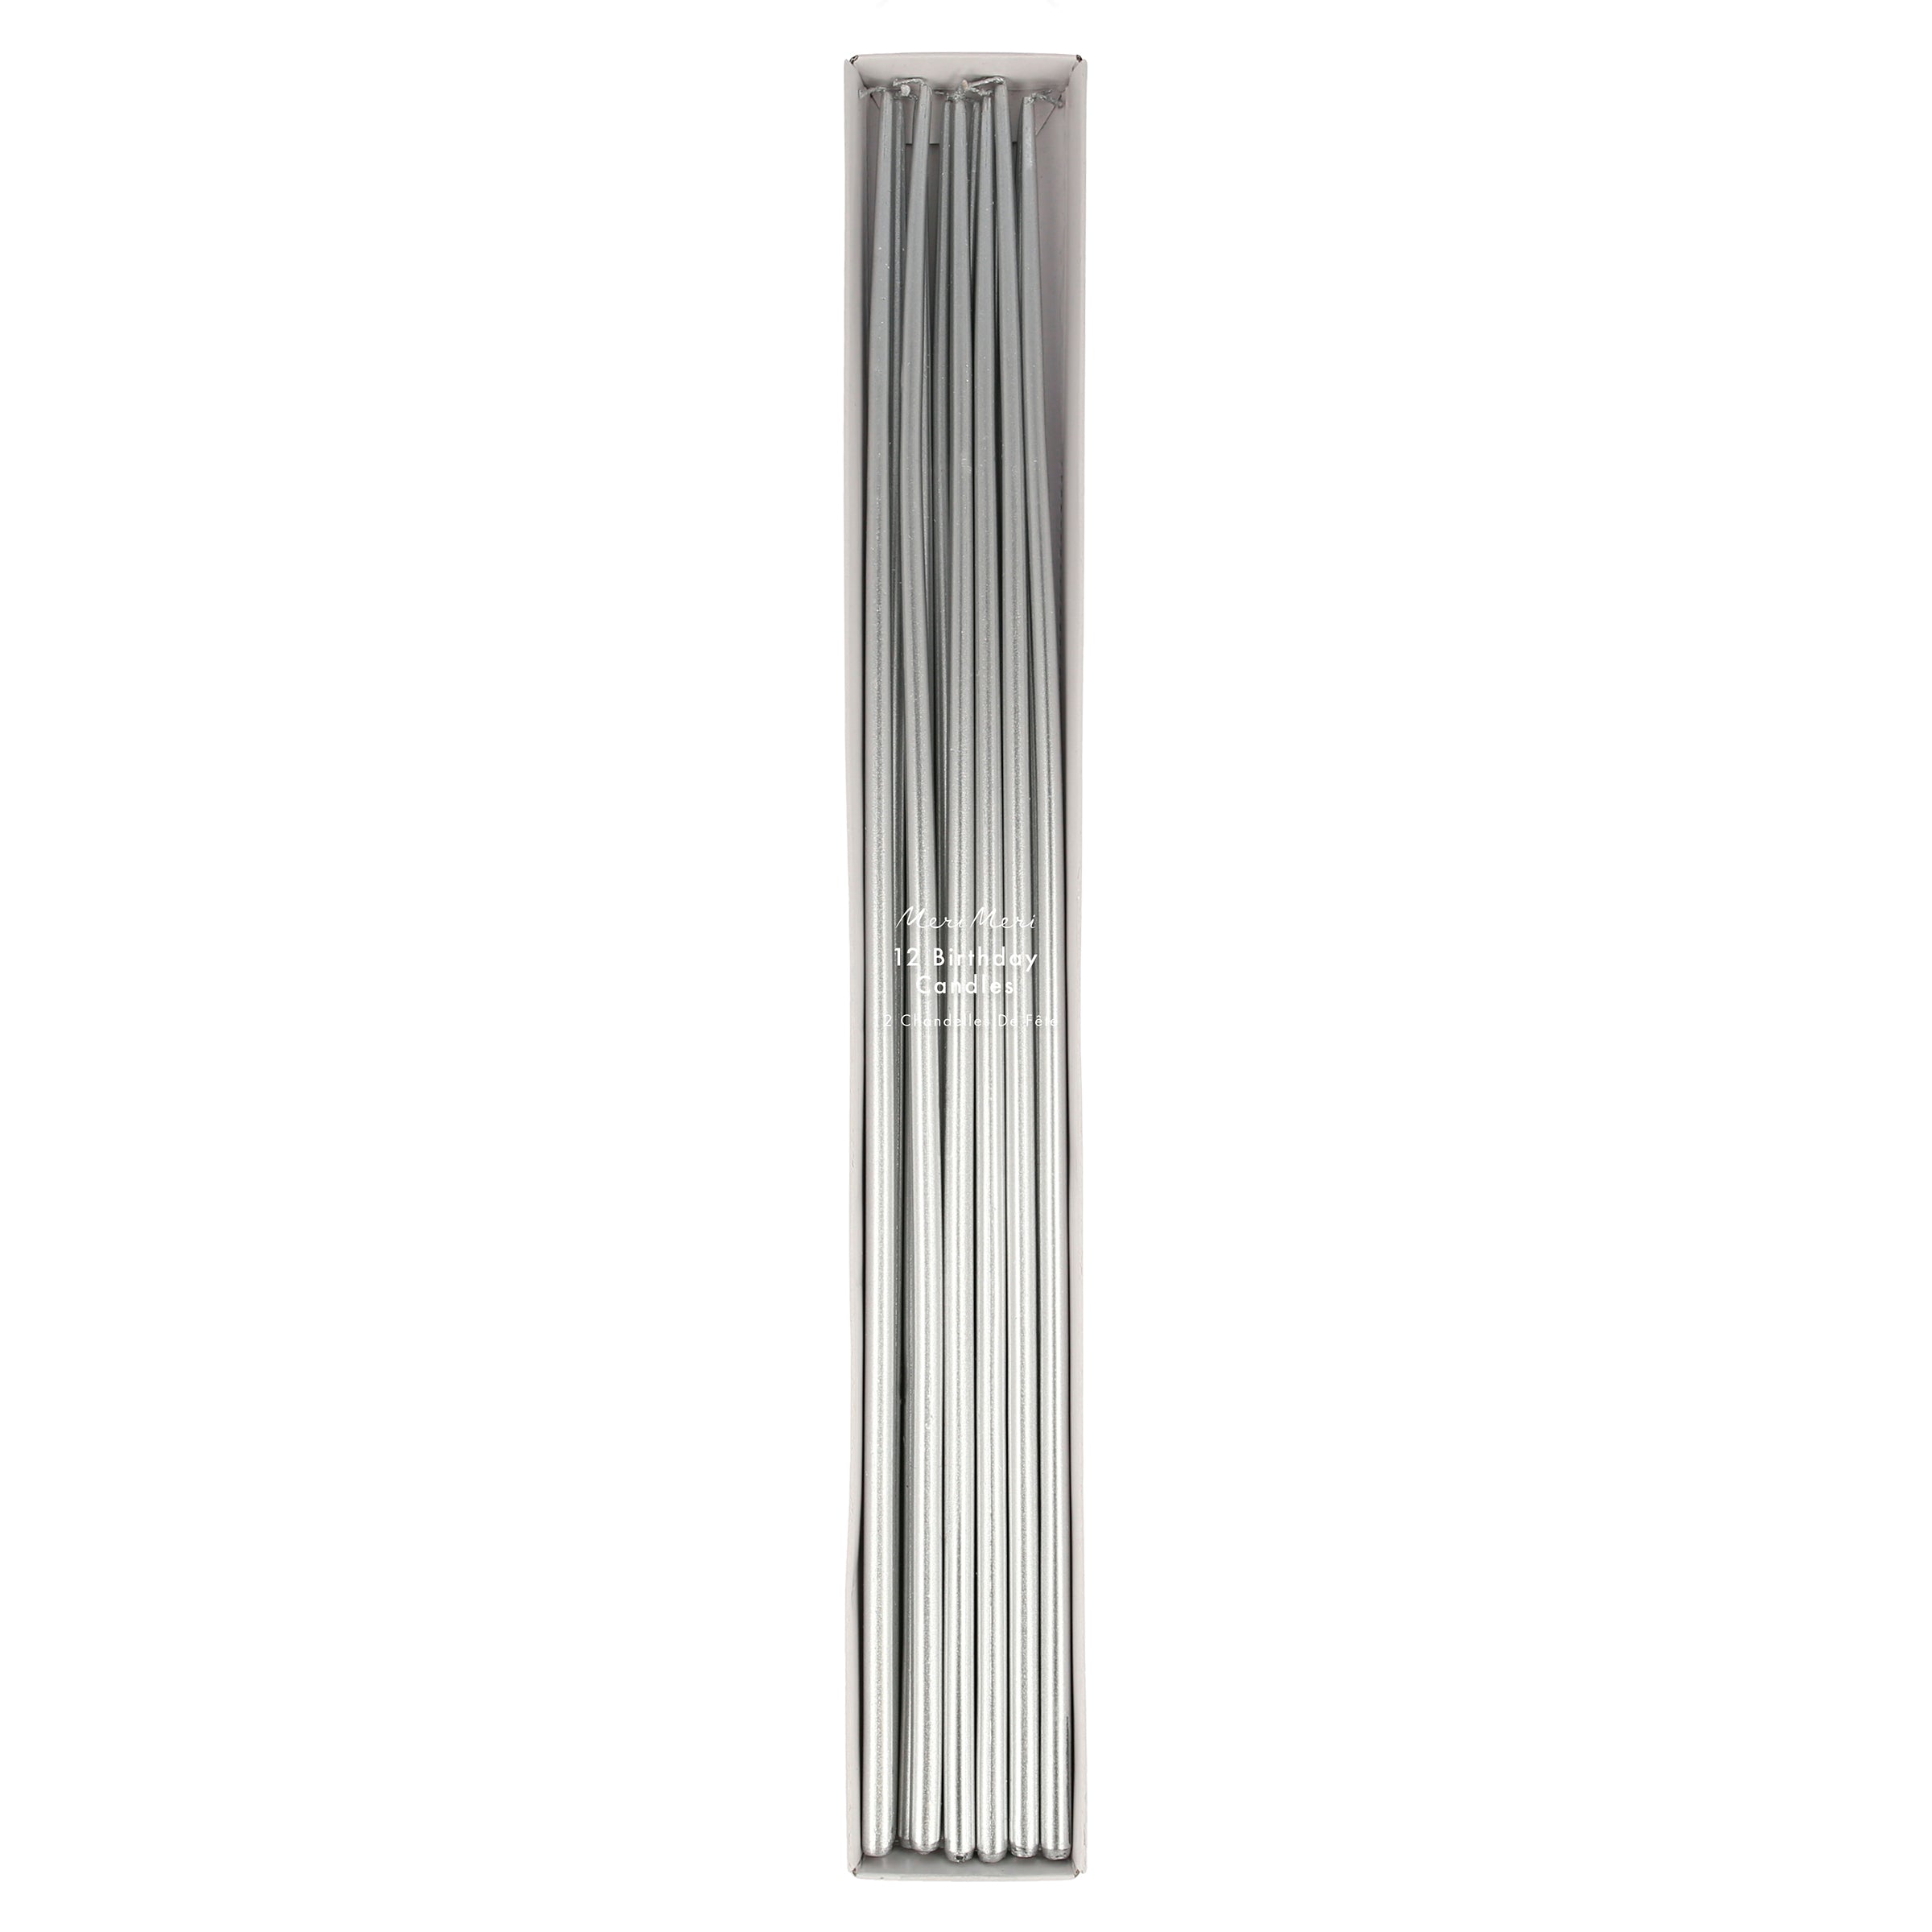 Our shiny silver candles, designed as tapered candles, are super tall for a special birthday cake decoration.